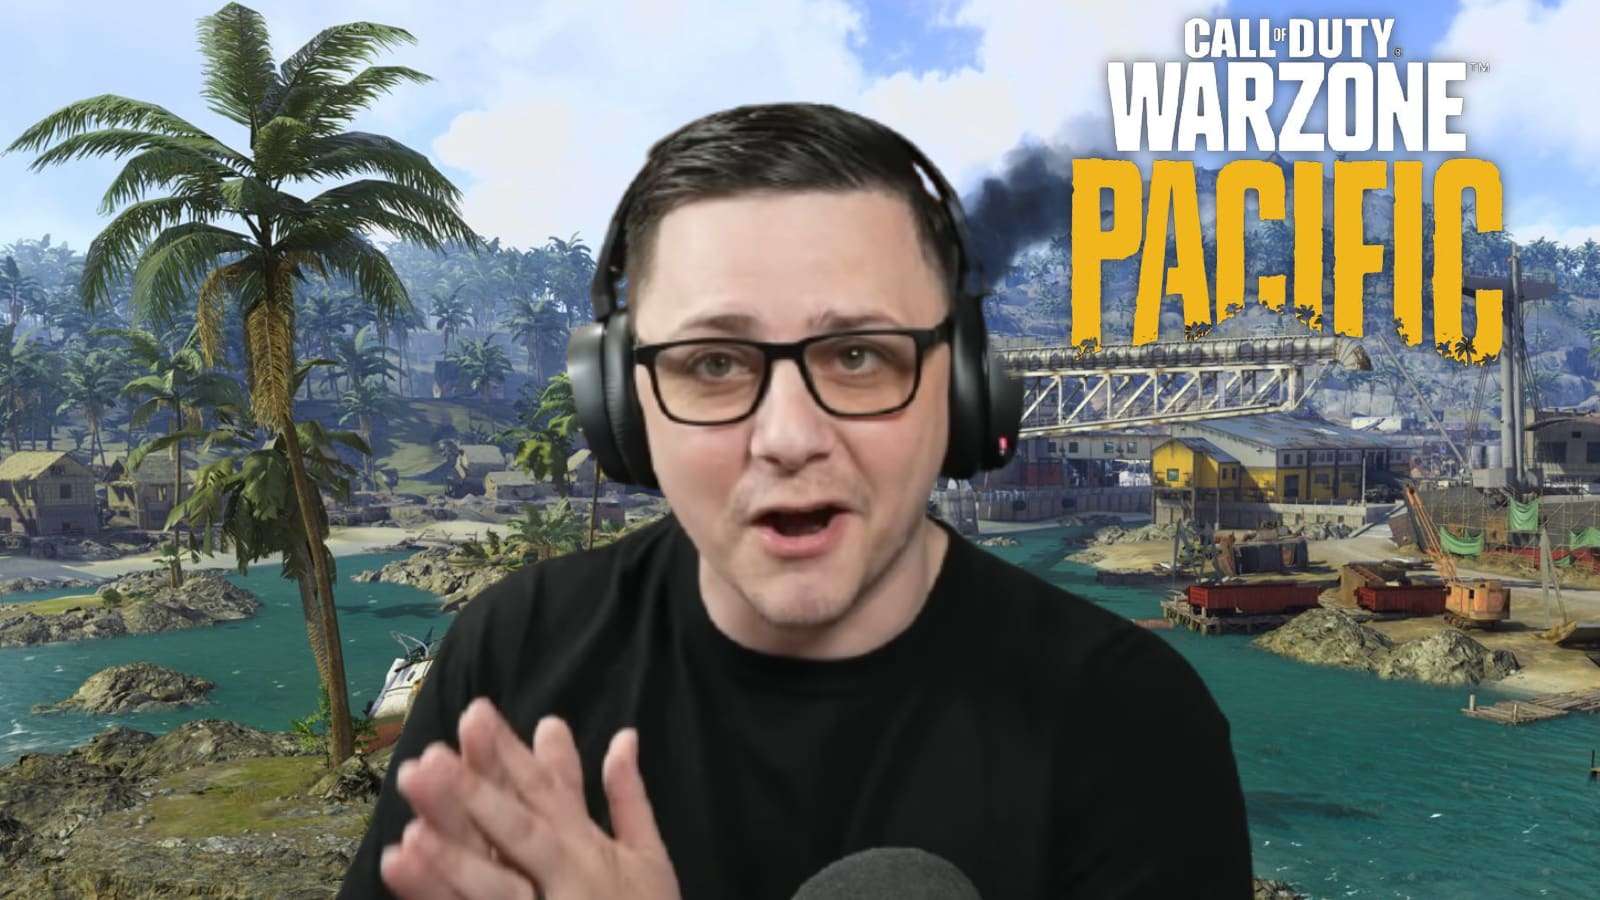 JGOD blasts Warzone devs for going on vacation while game is completely “broken”